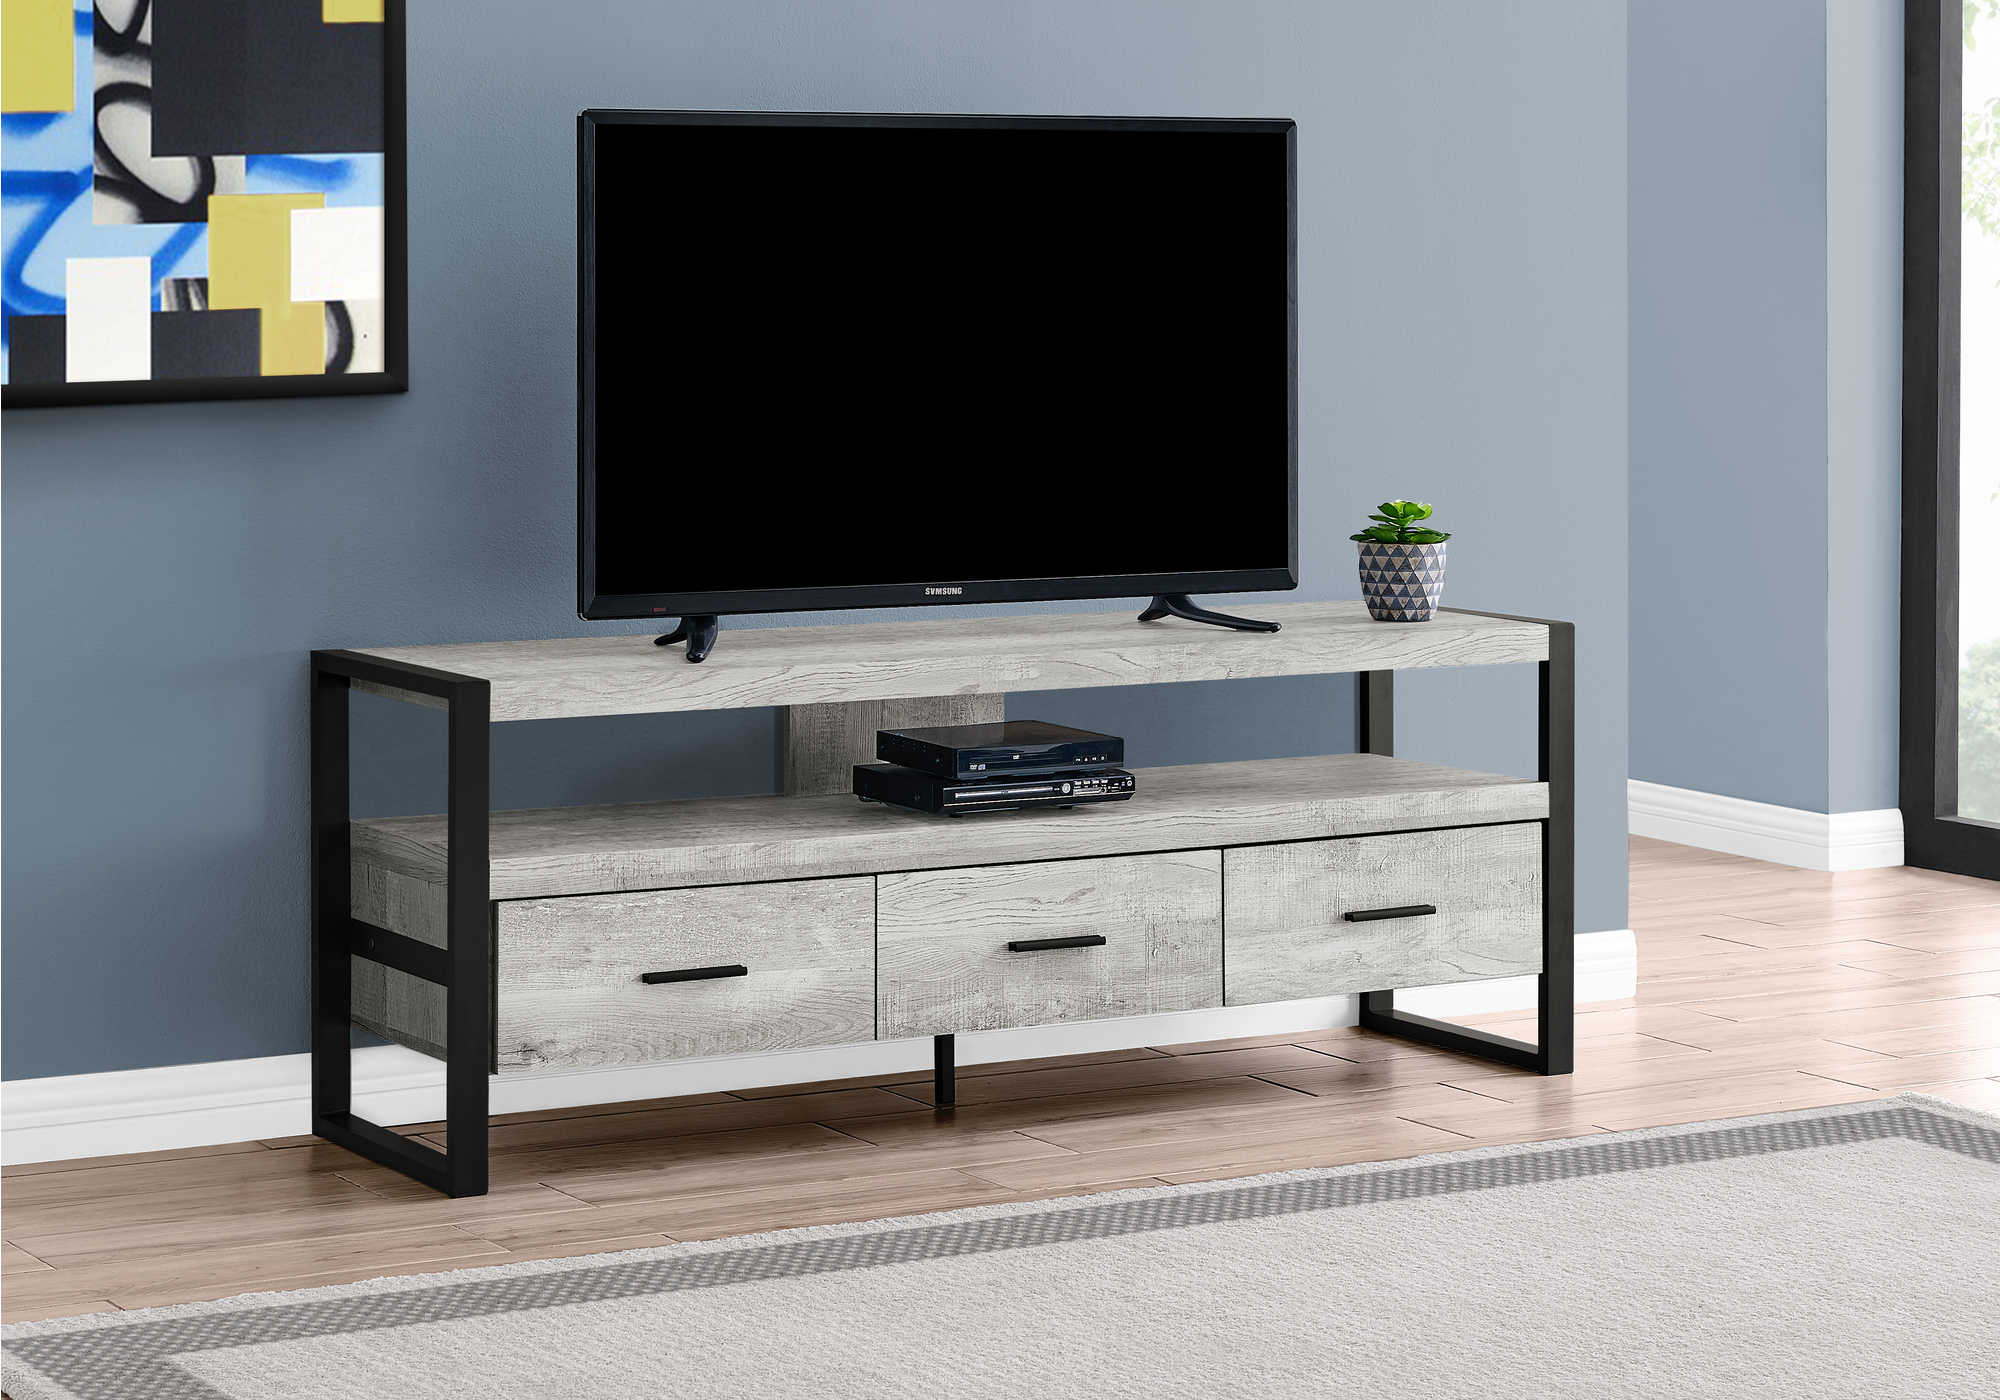 TV STAND - 60"L / GREY RECLAIMED WOOD-LOOK / 3 DRAWERS